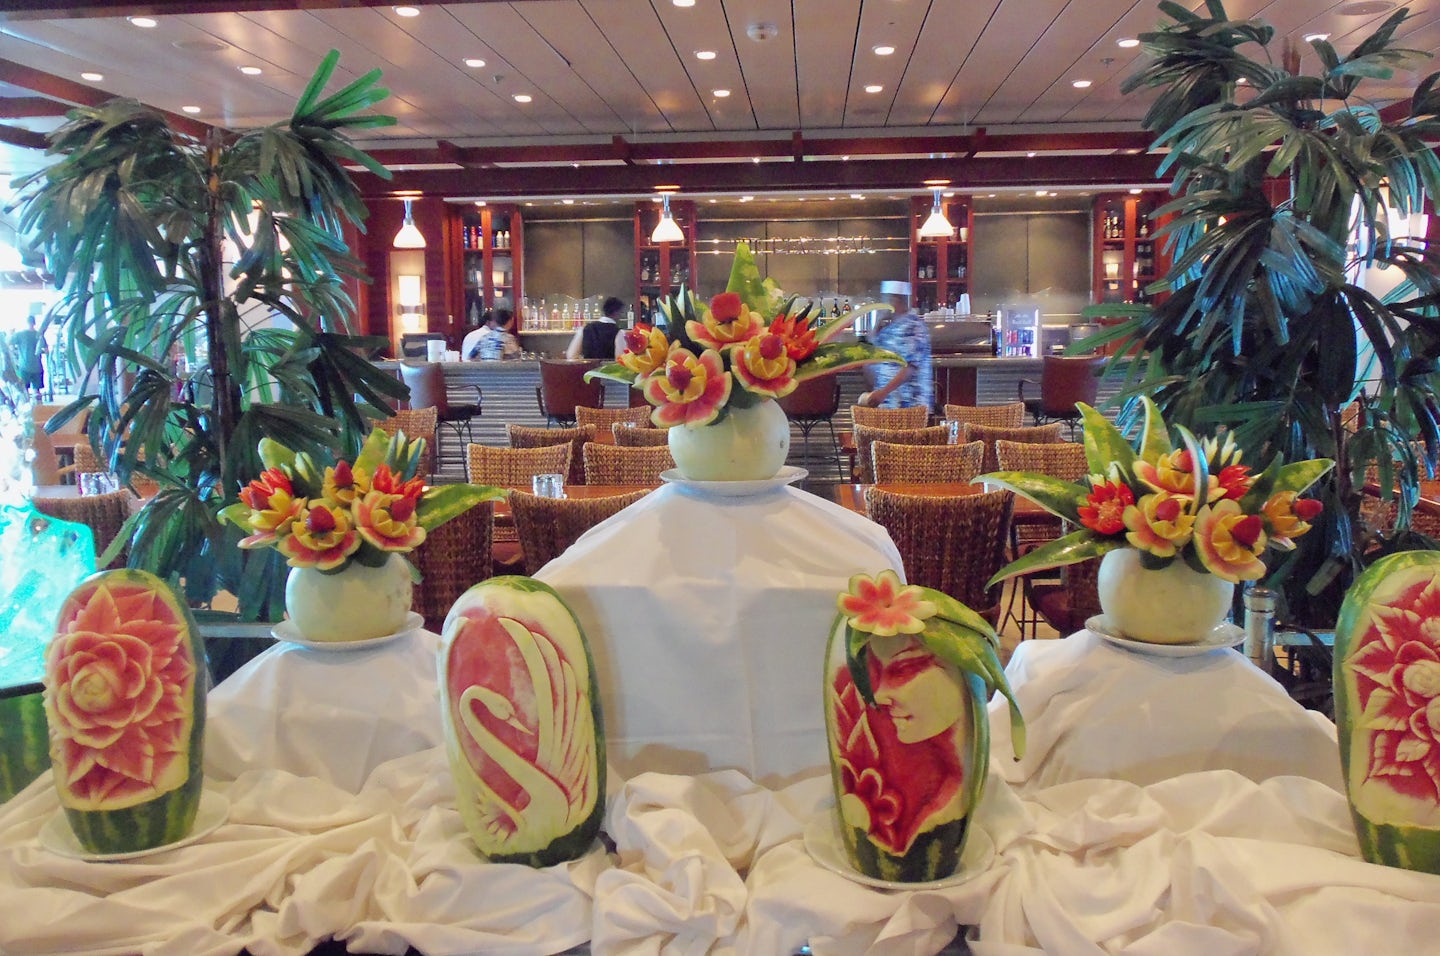 Fabulous fruit carvings on display at entrance to Windjammer.